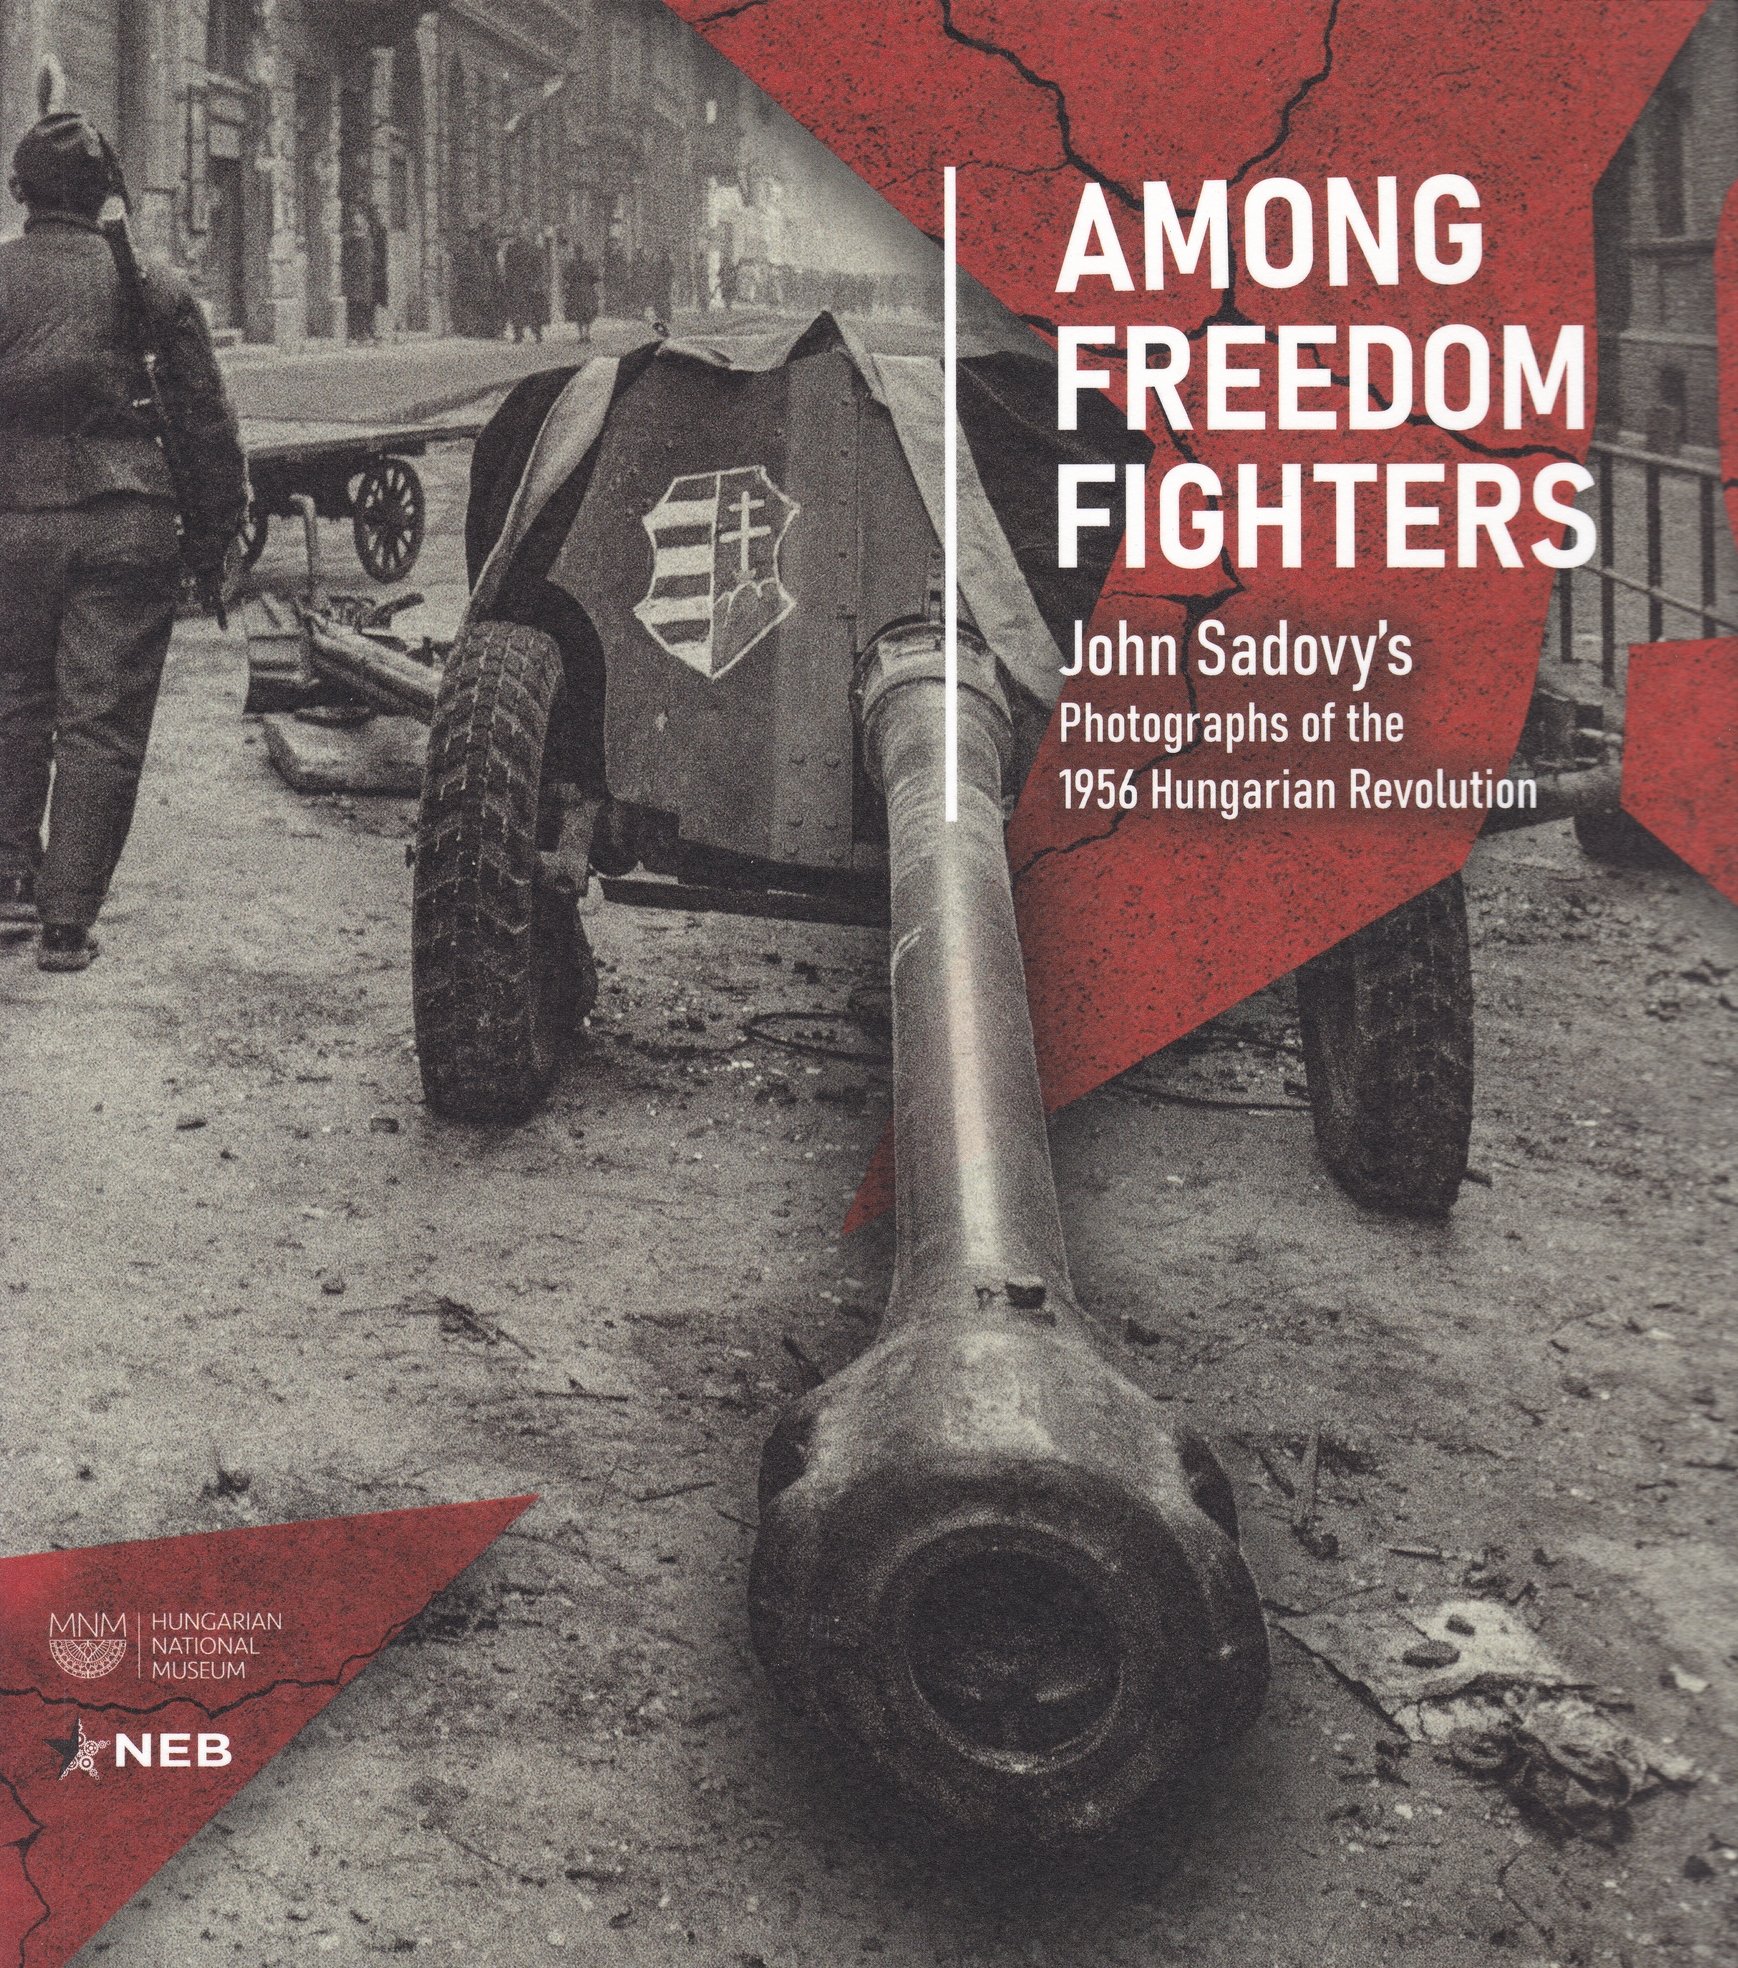 Among freedom fighters. John Sadovy's photographs of the 1956 Hungarian Revolution (Rippl-Rónai Múzeum CC BY-NC-ND)